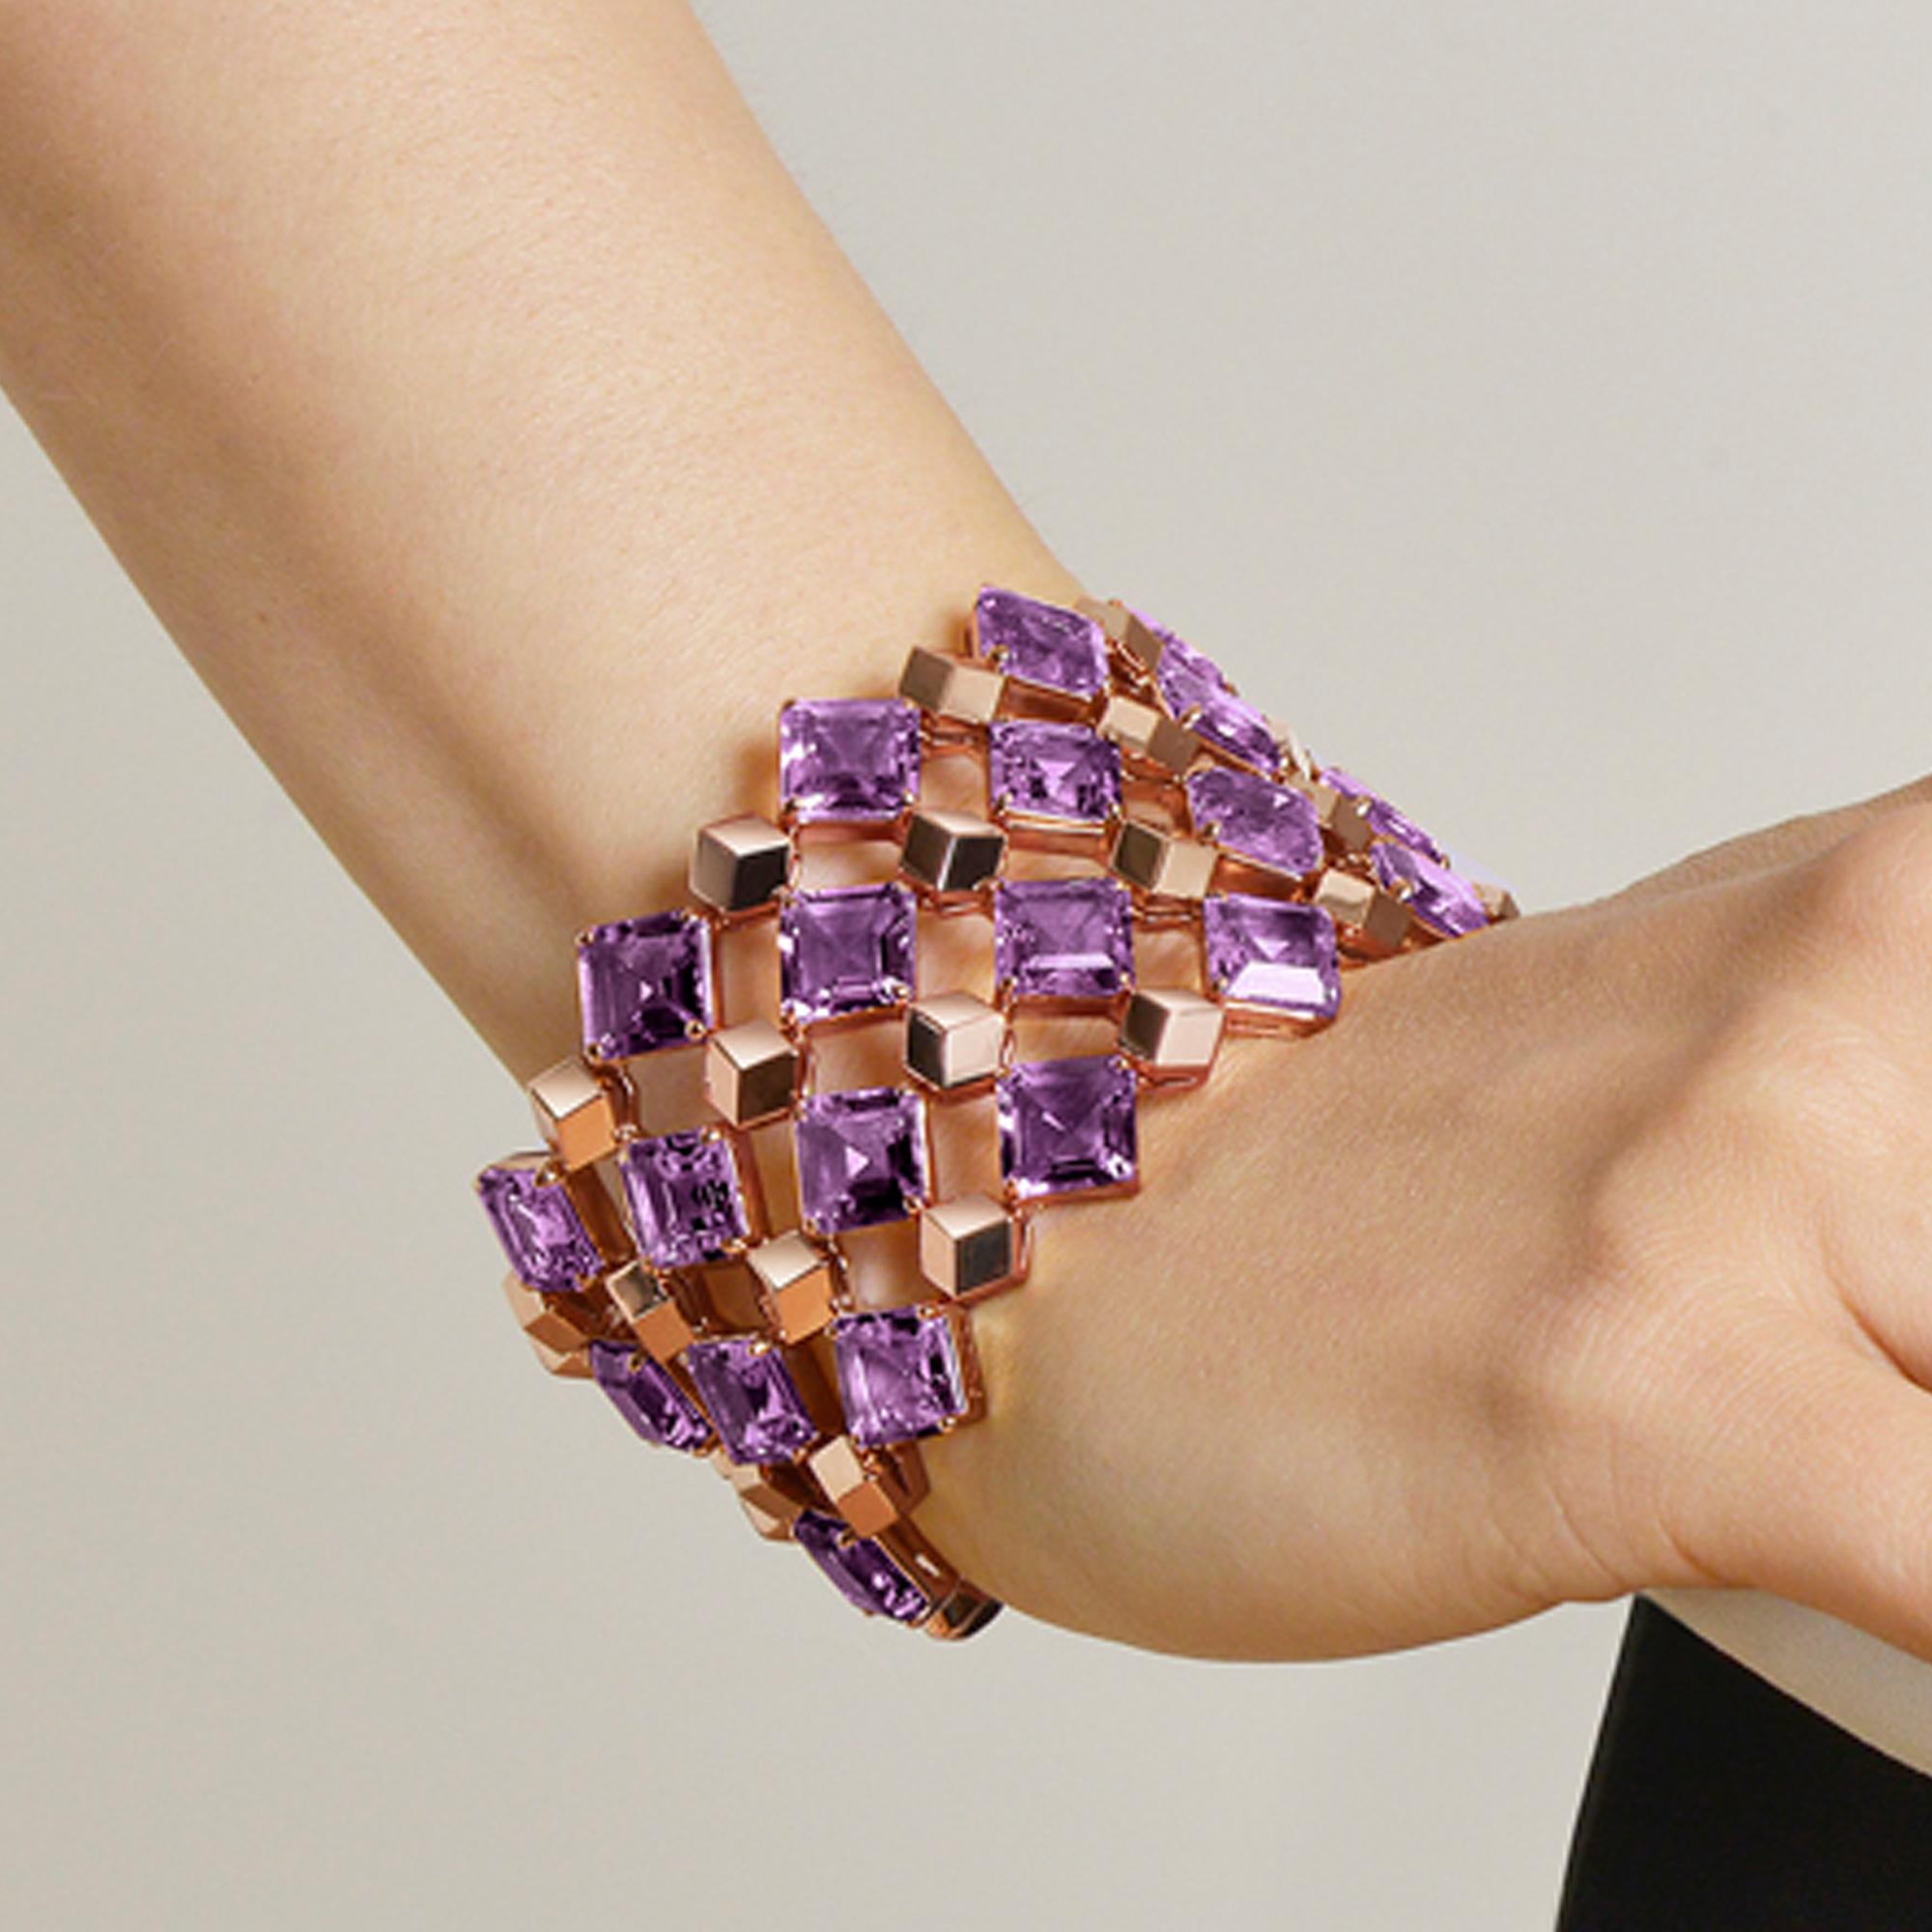 Contemporary Paolo Costagli 18 Karat Rose Gold Amethyst 84.56 Carat Very PC Cuff For Sale